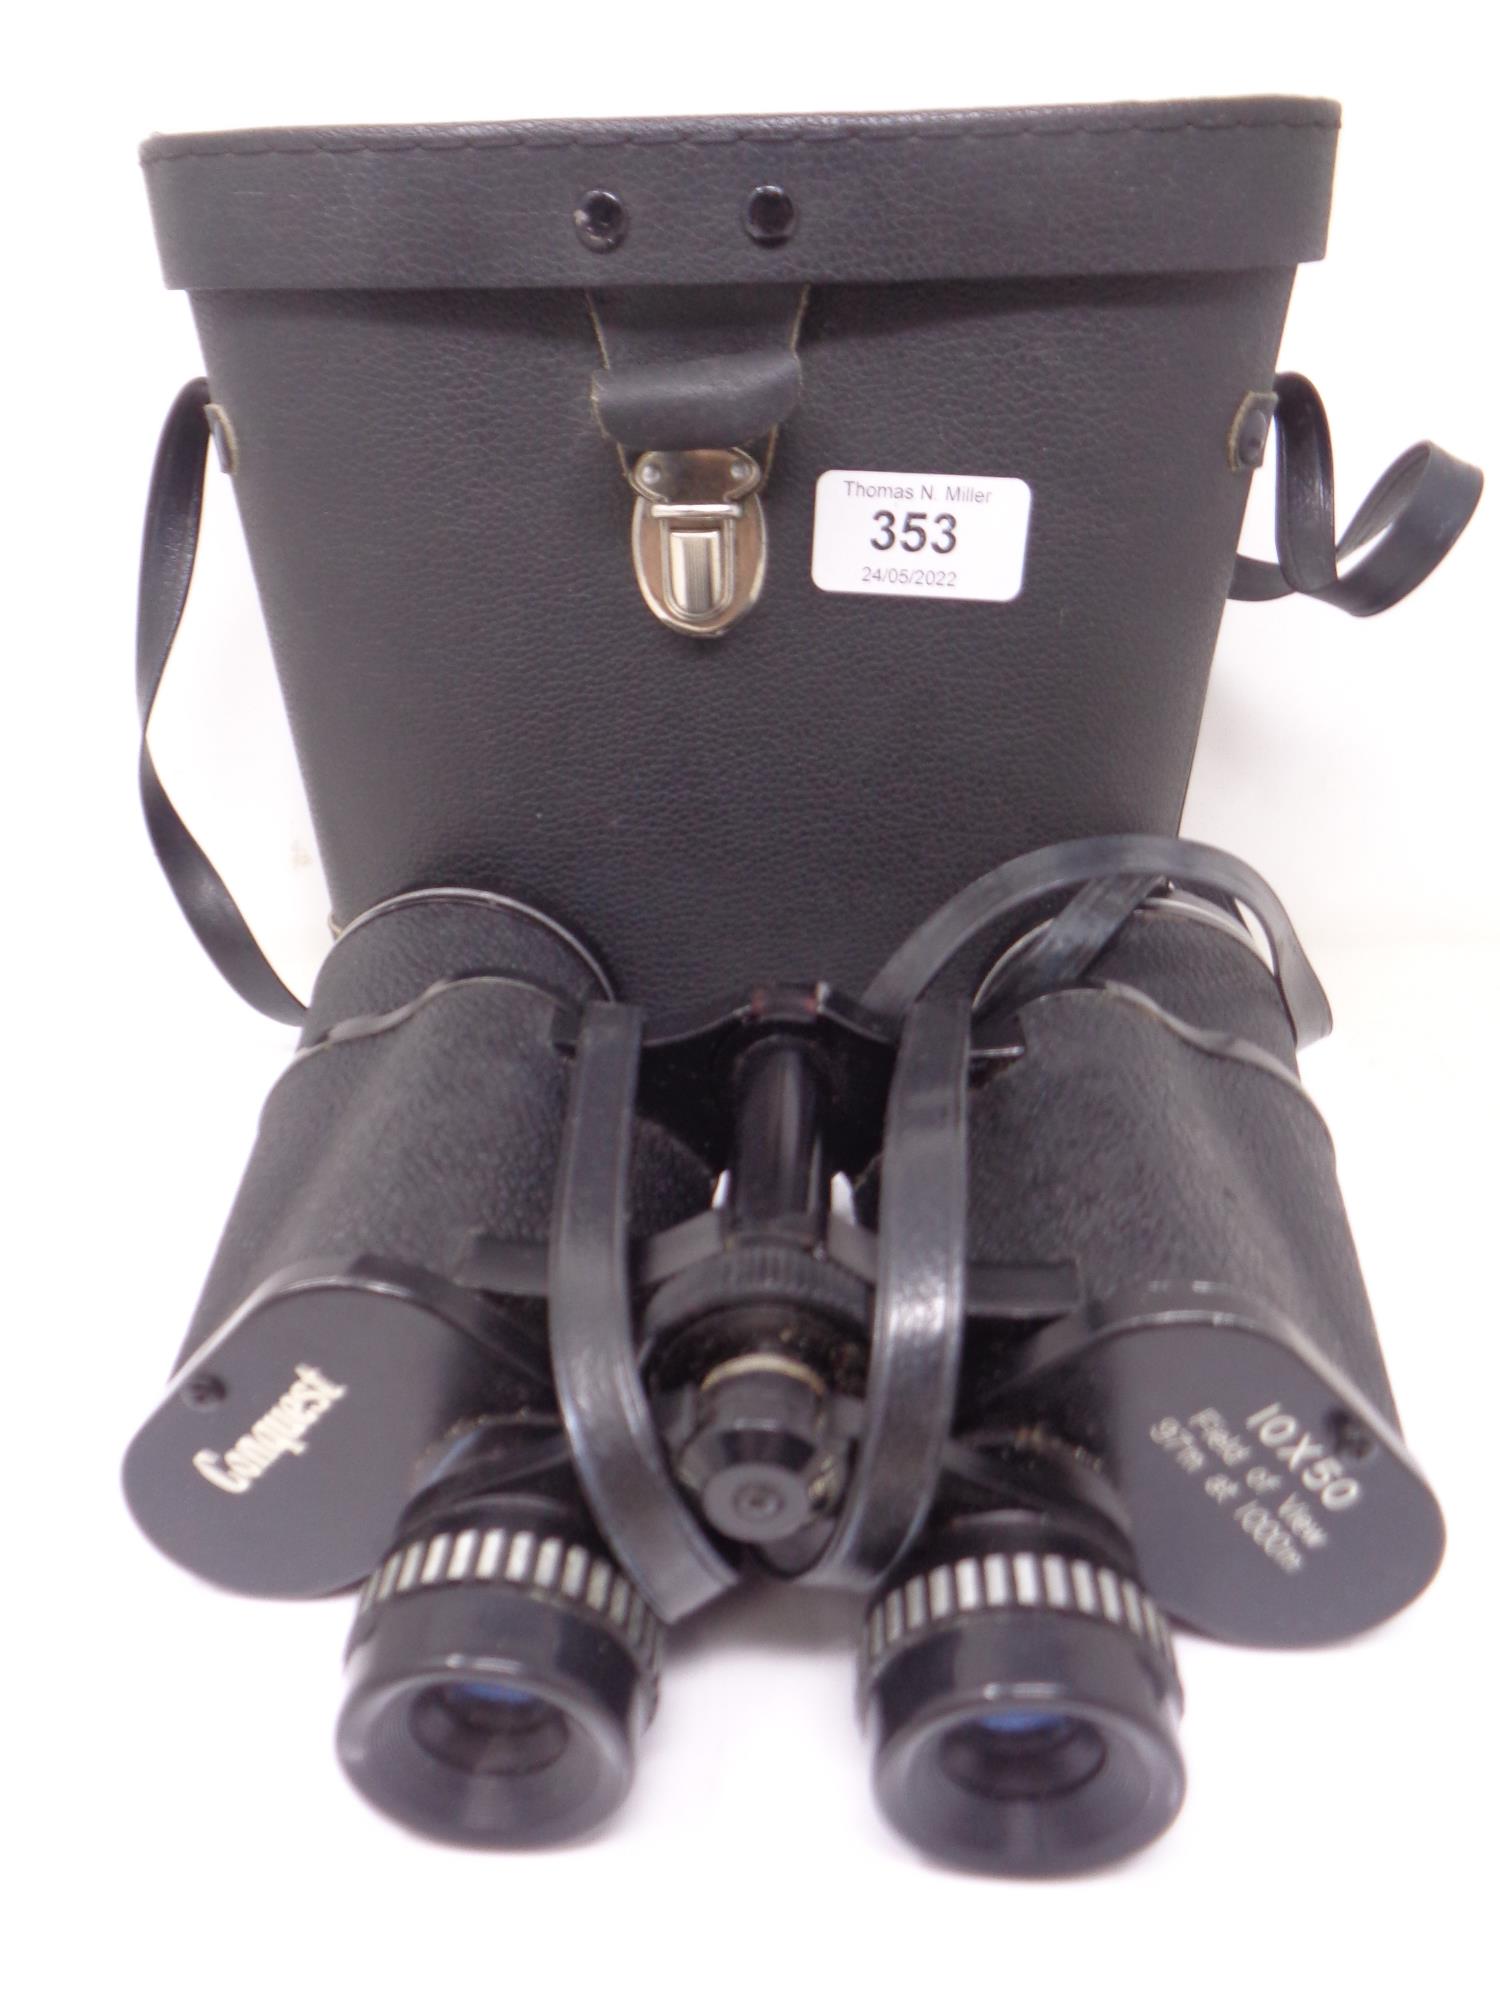 A pair of Conquest binoculars in leather case